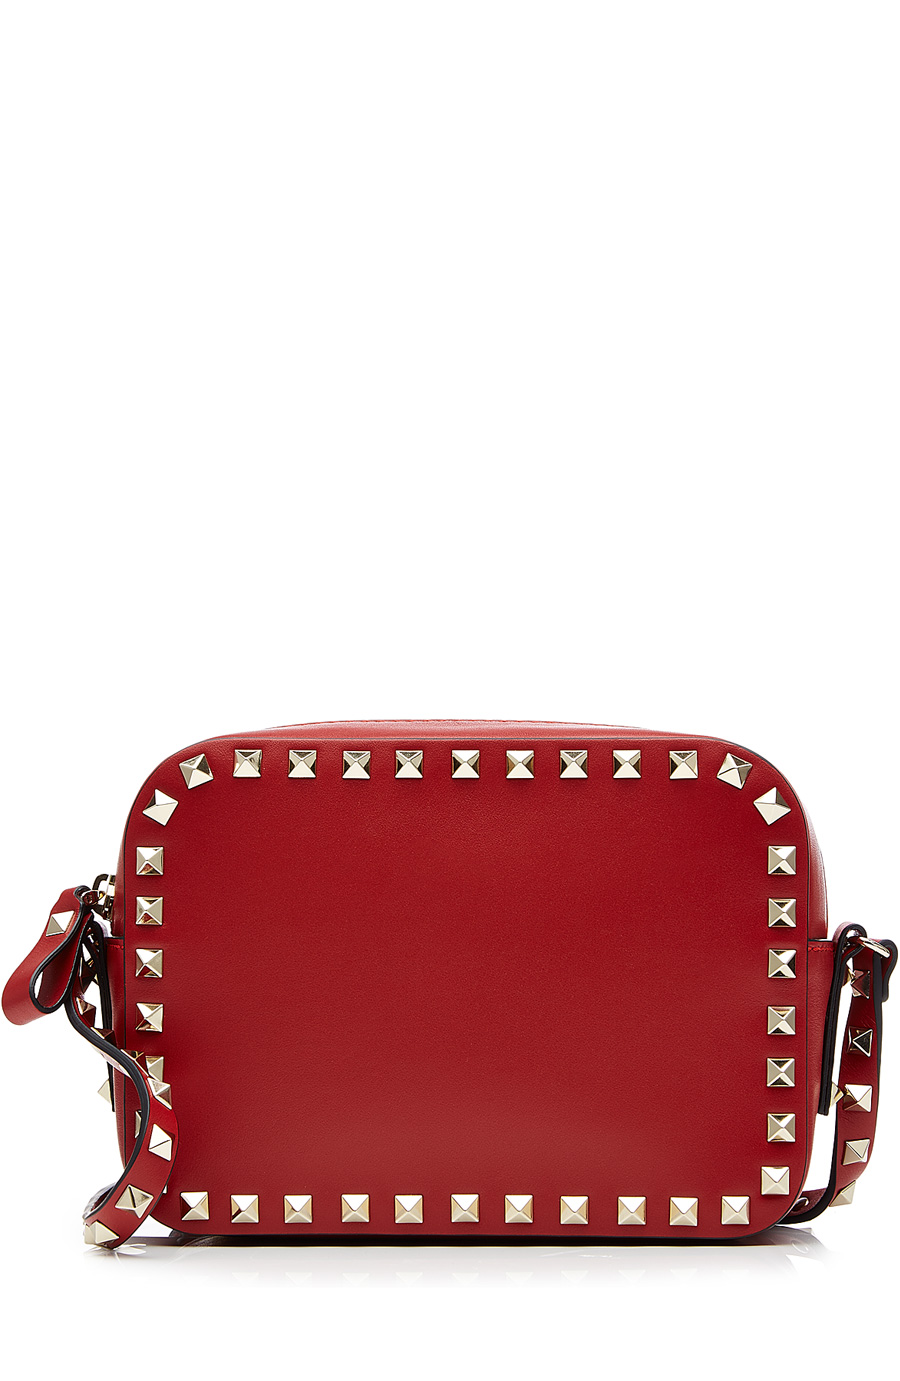 Valentino Rockstud Collection | FASHION STYLE FAN